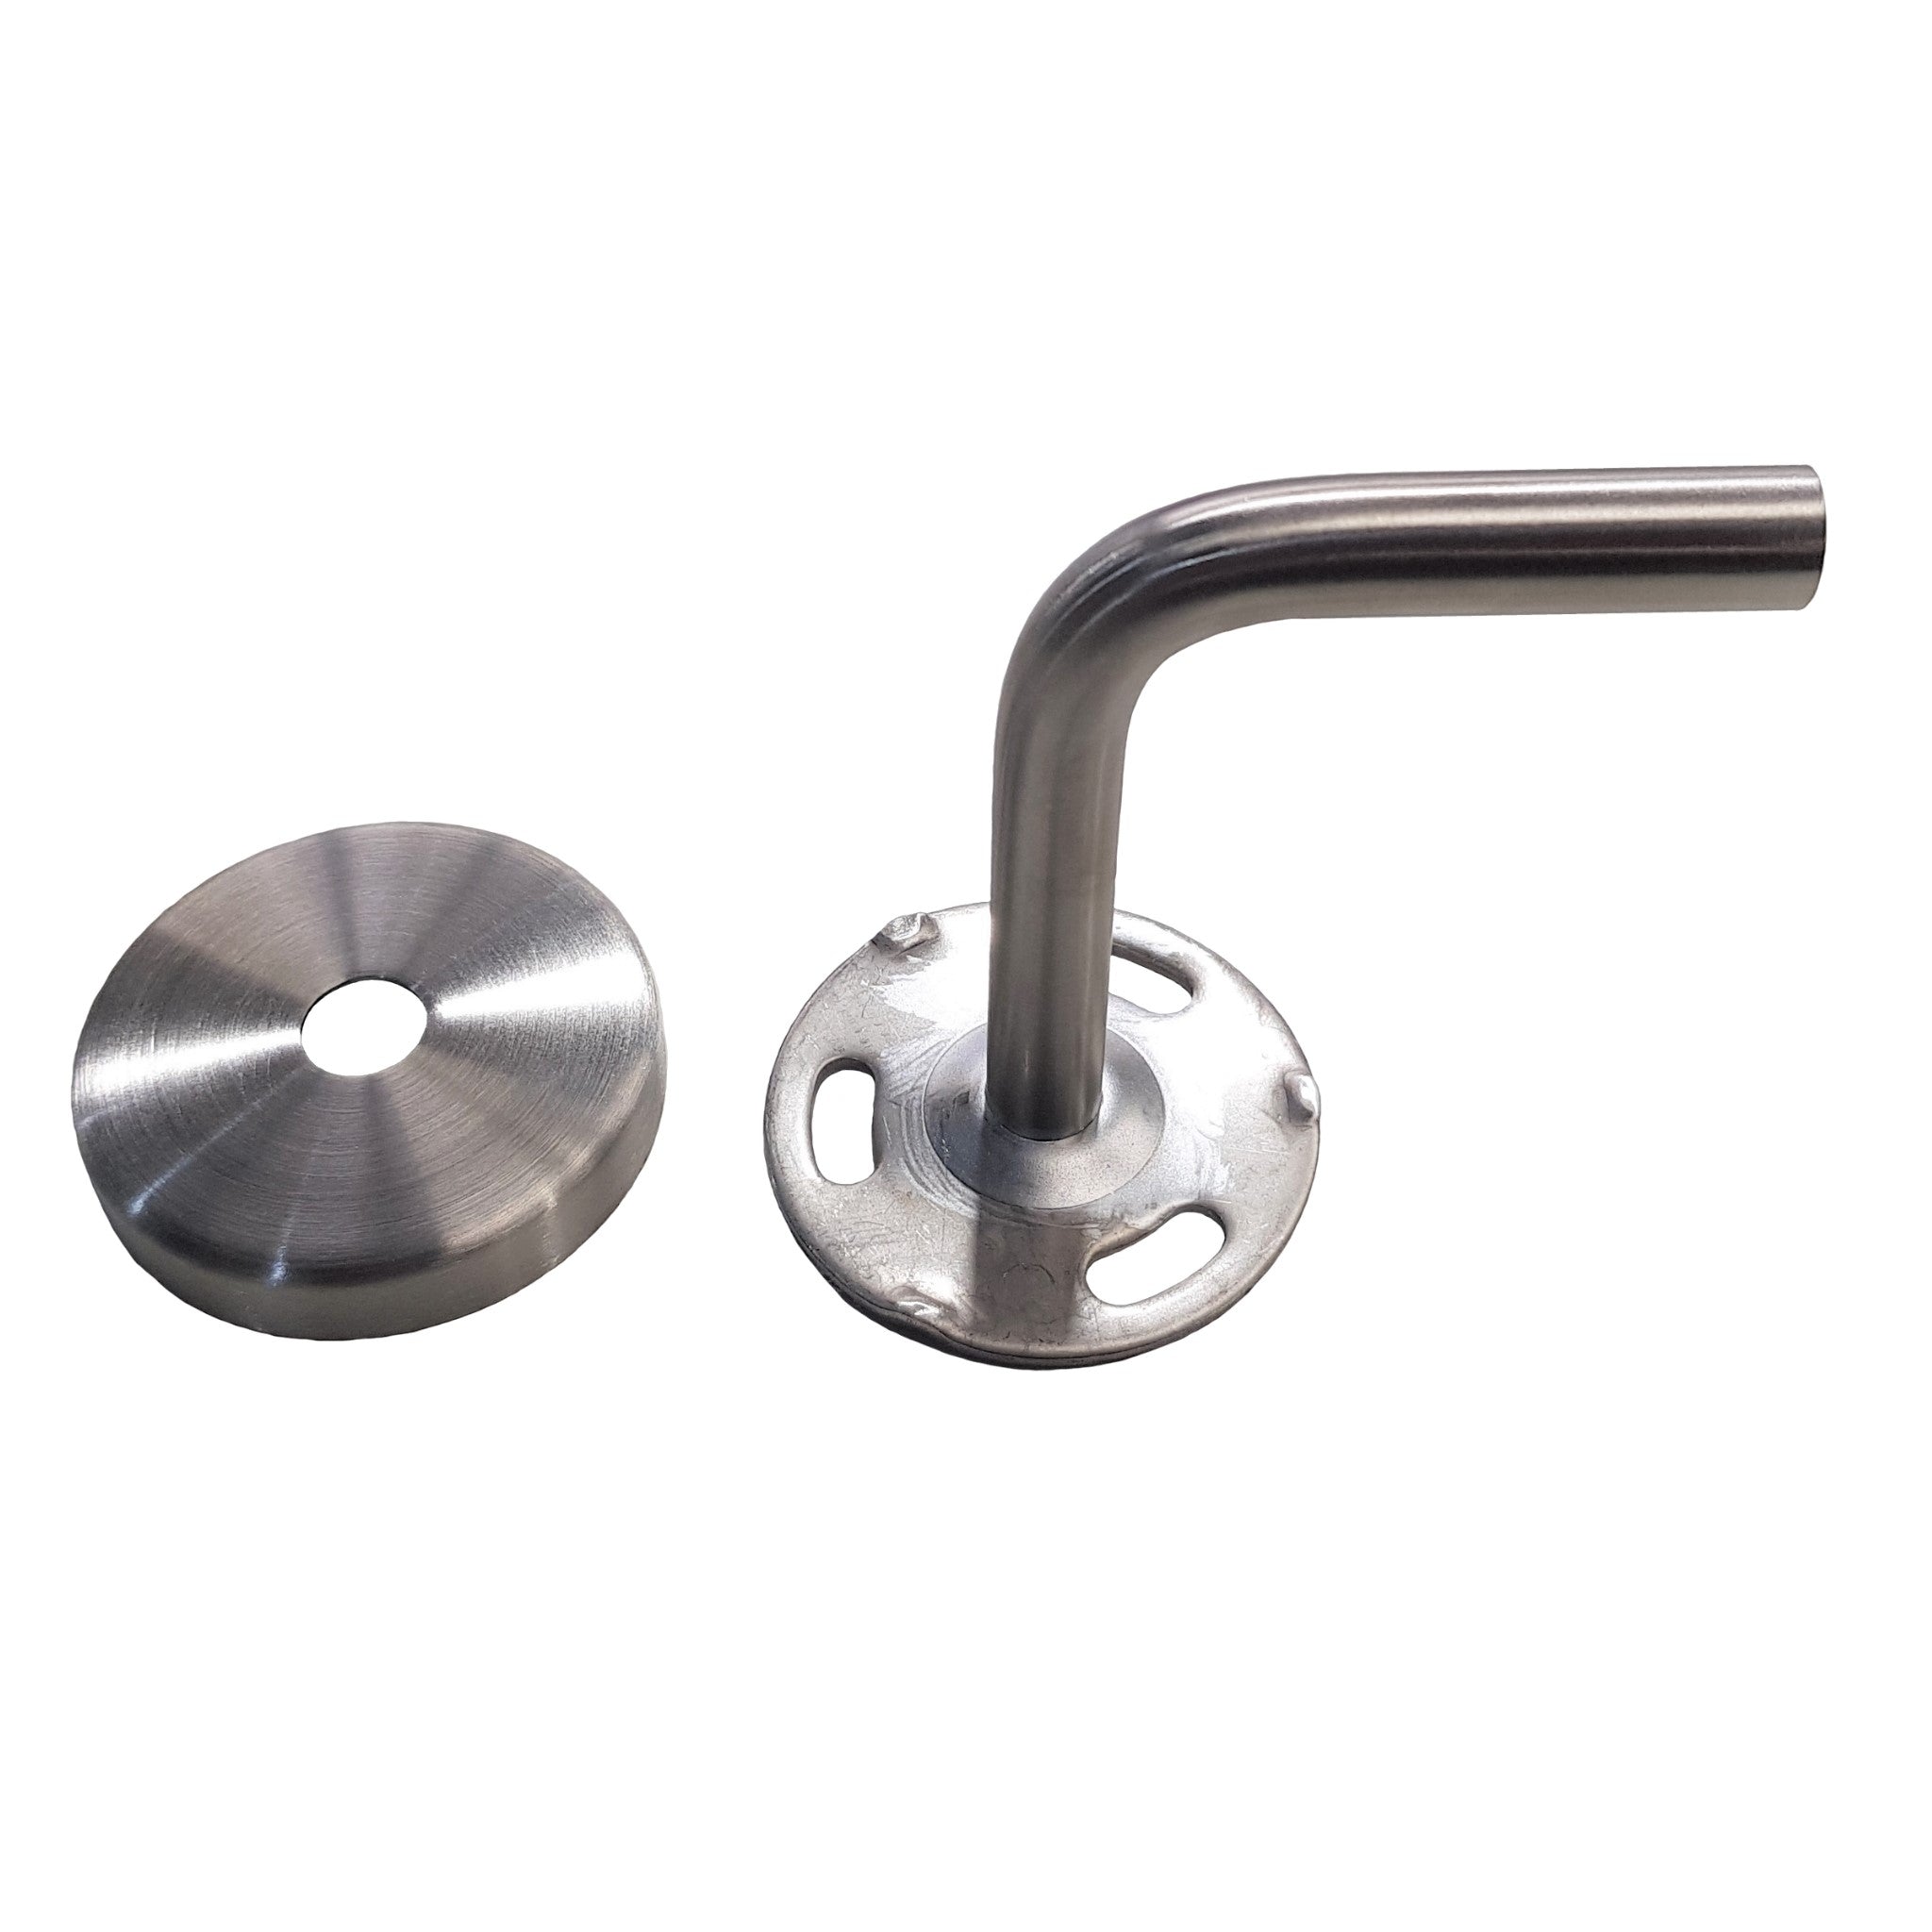 Handrail Bracket - Wallmount - Threaded - Stainless Steel Products